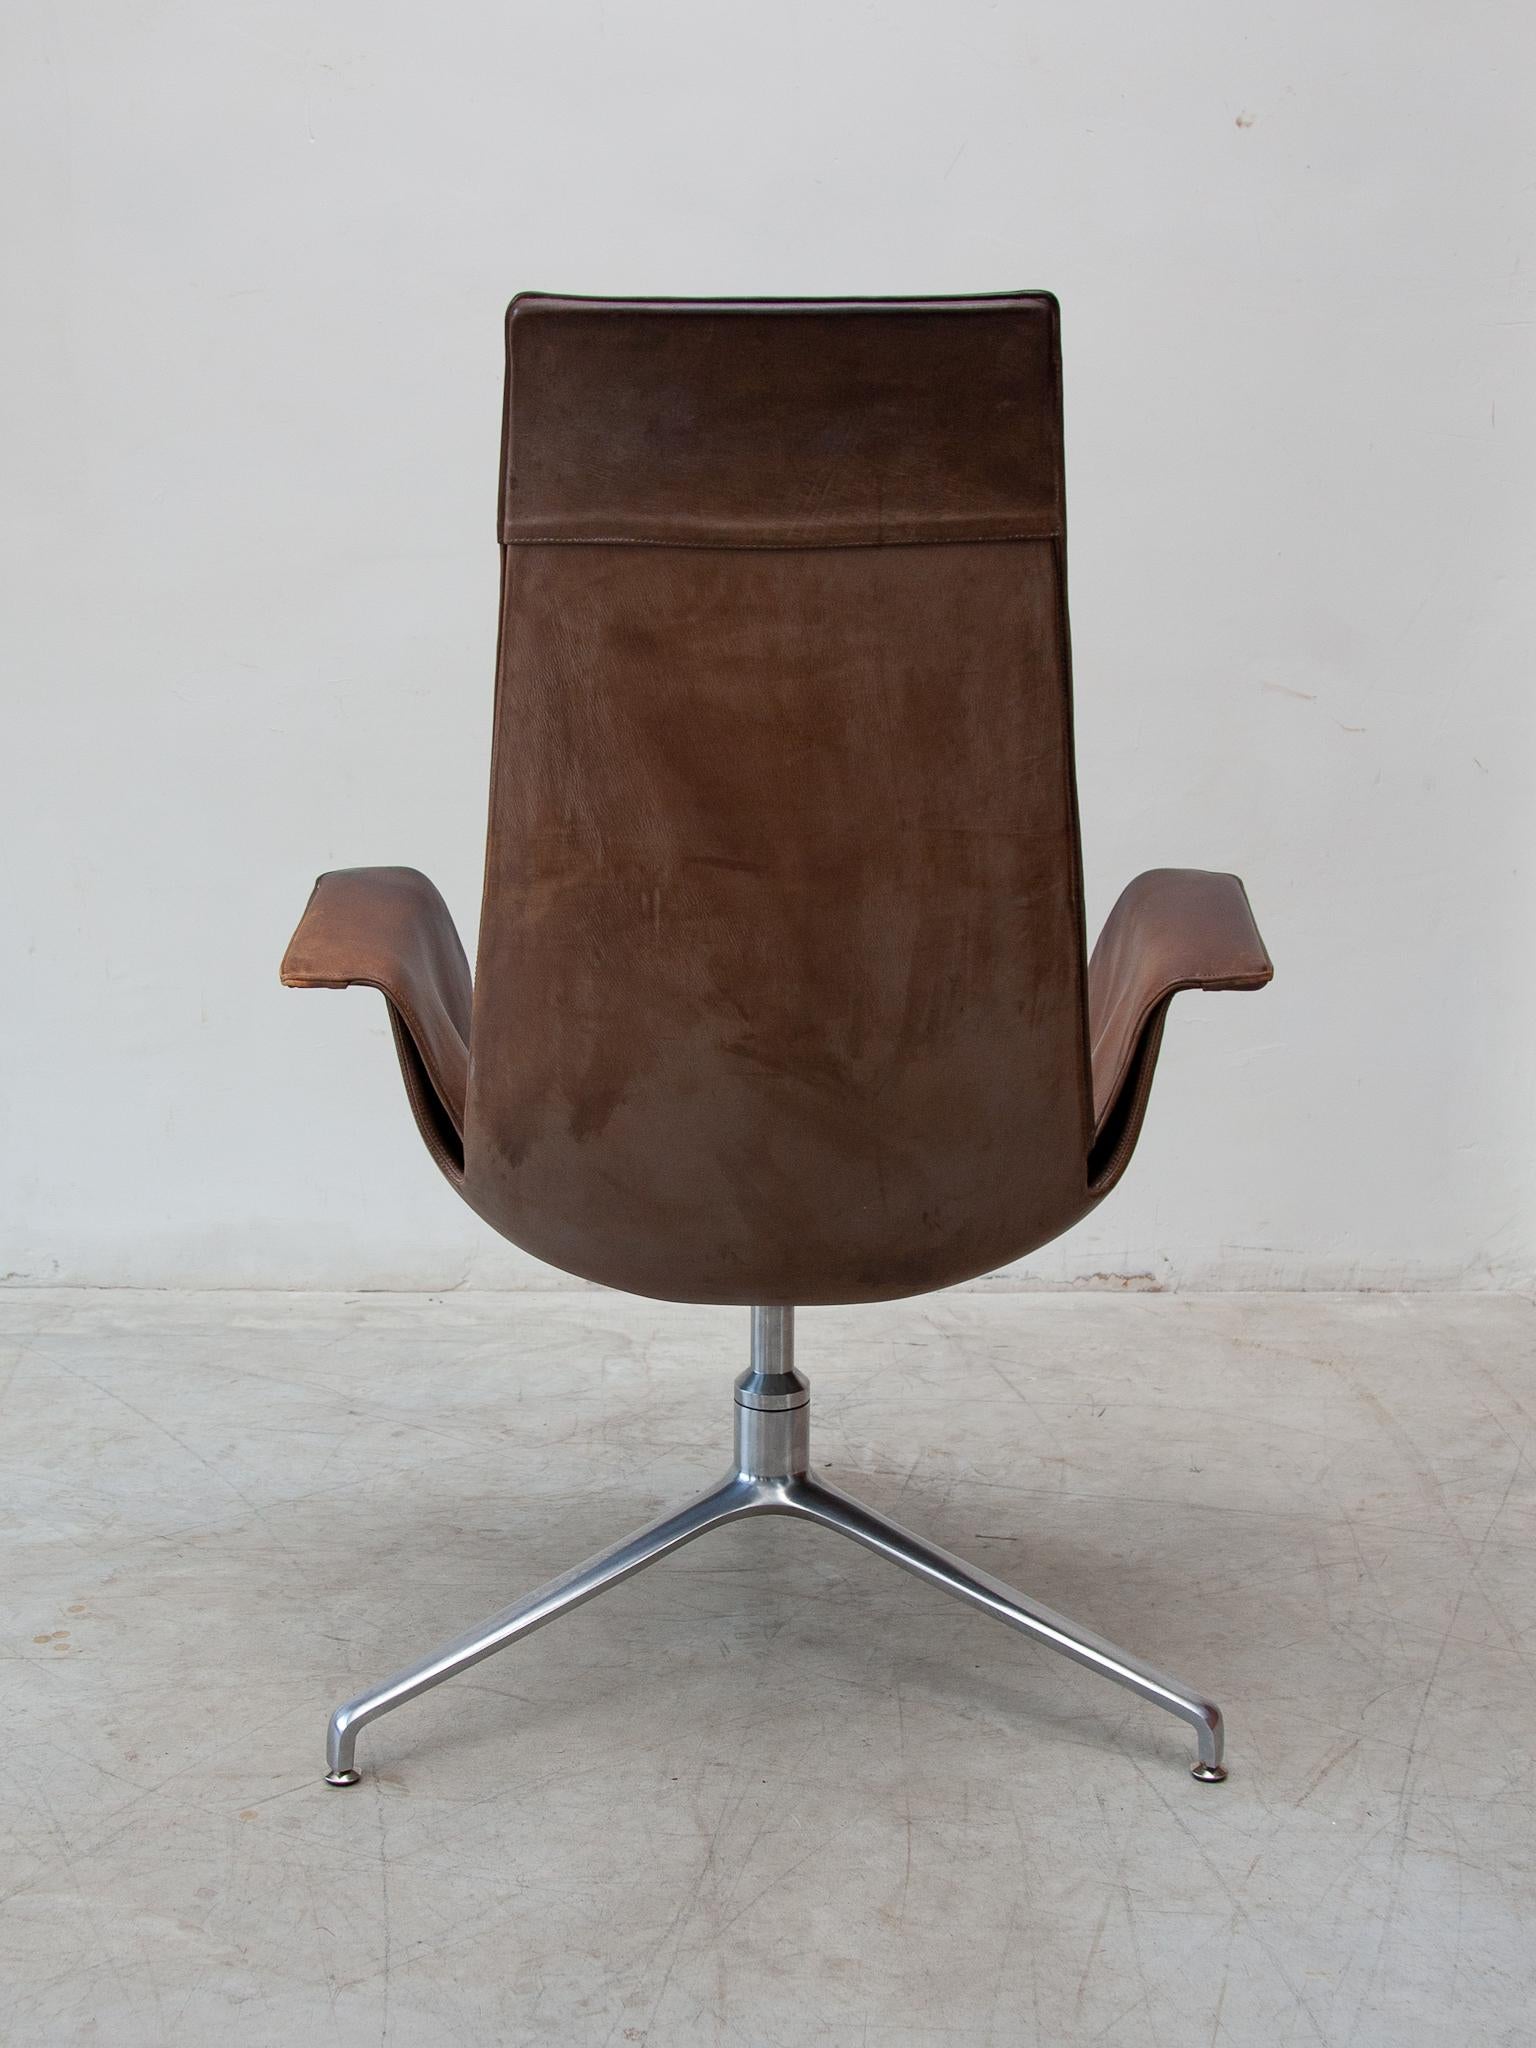 Fabricius & Kastholm FK6725 Desk, Lounge Chair in Brown Leather, Kill For Sale 3